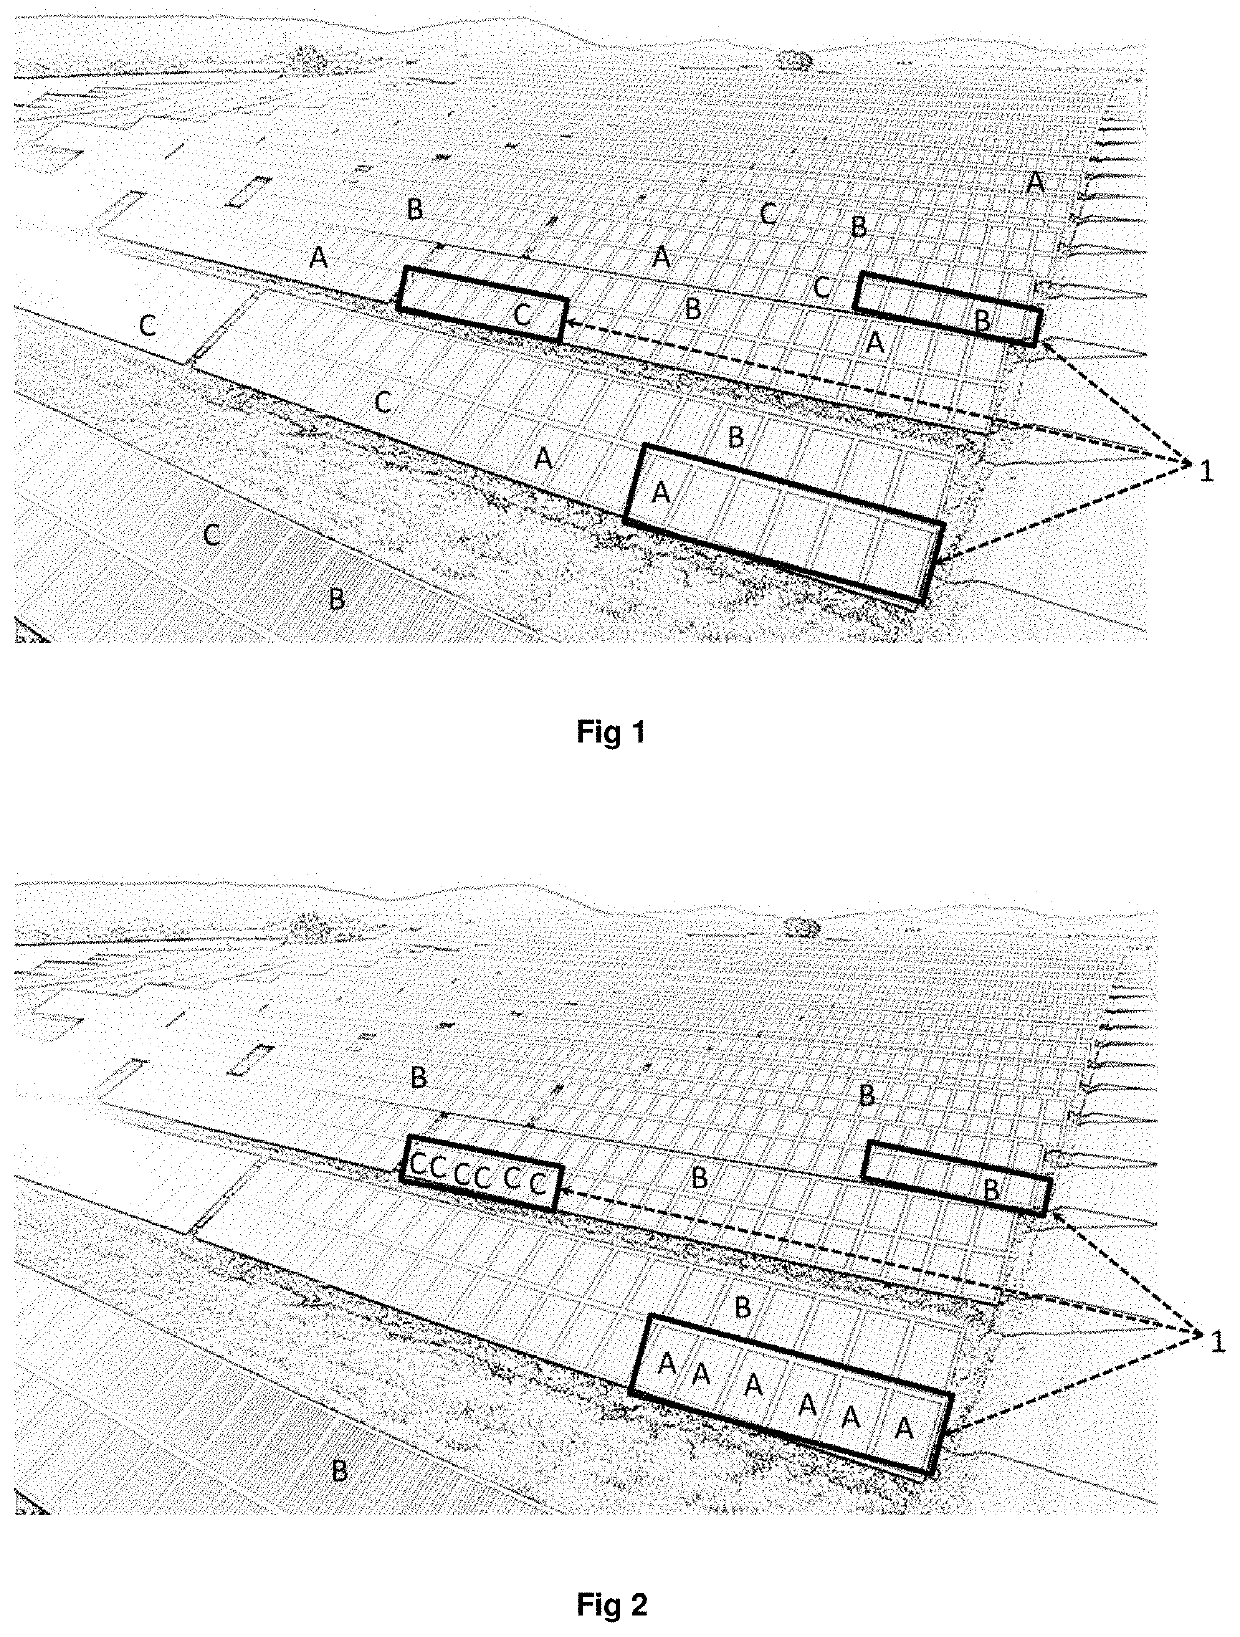 Method for optimizing the power enhancement of photovoltaic solar plants using smart preventive and predictive maintenance